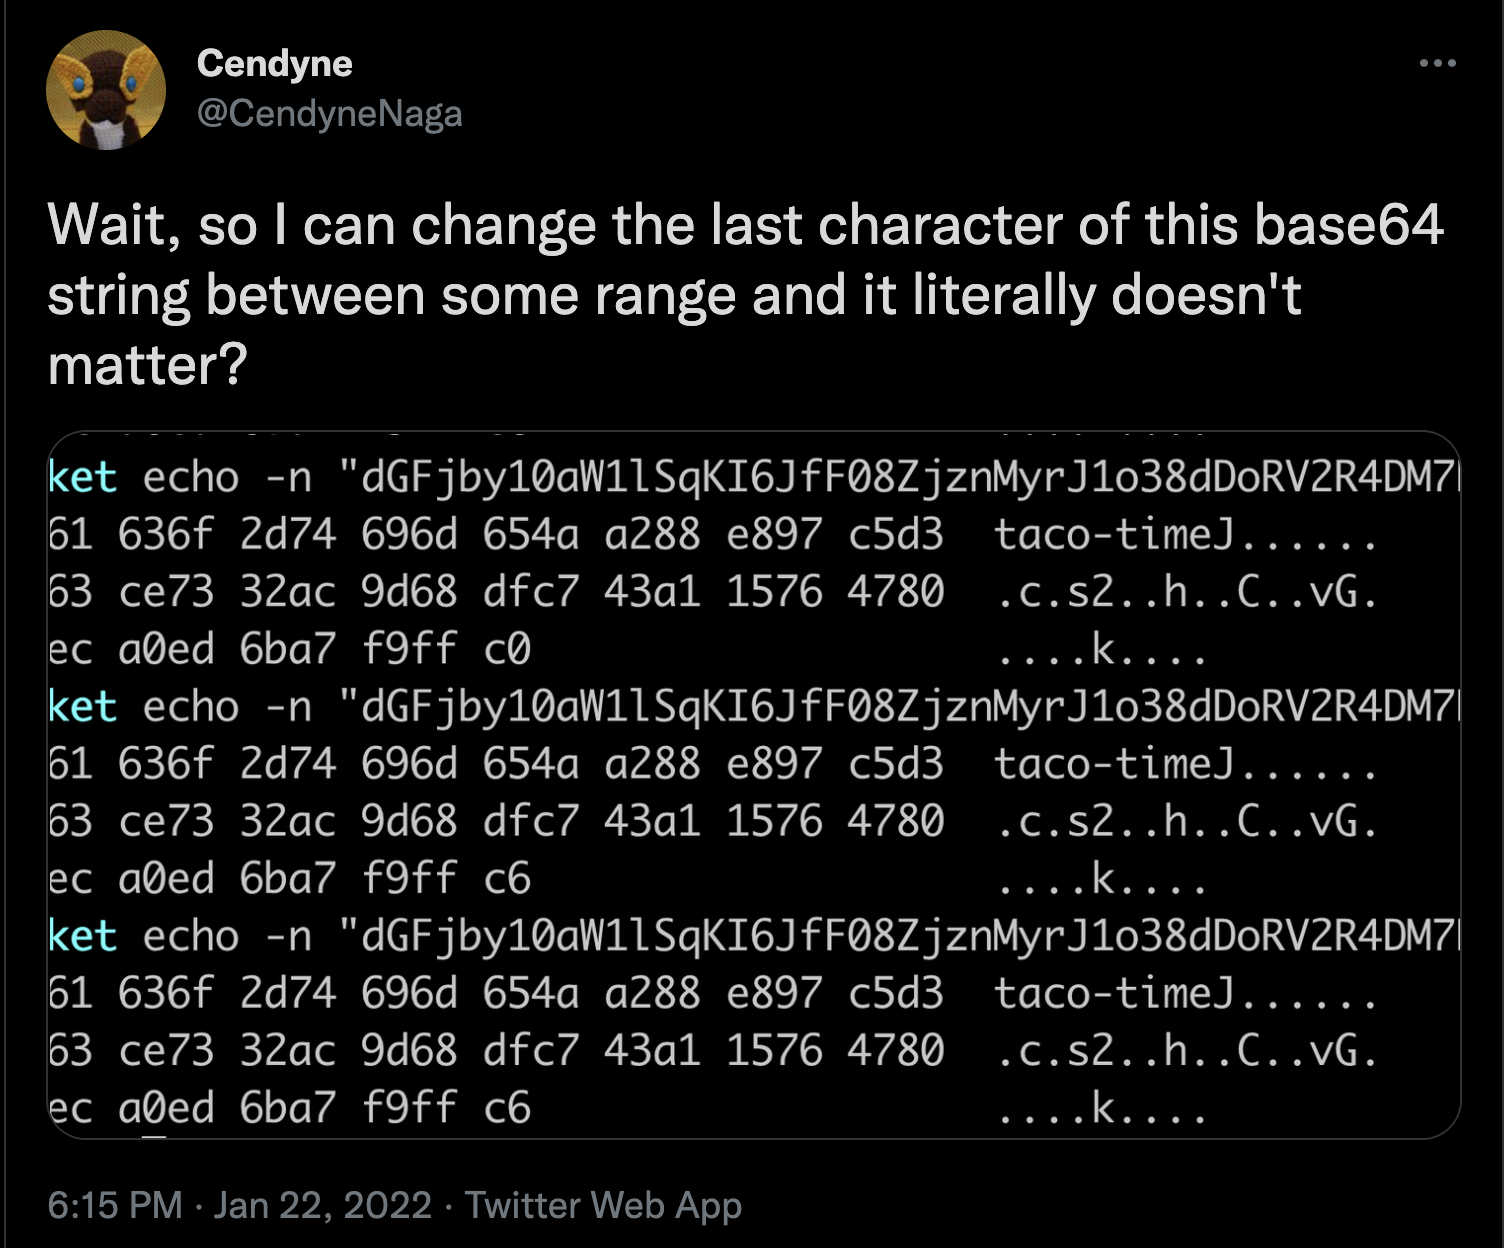 Surprise at base64 being manipulated at the end without consequence